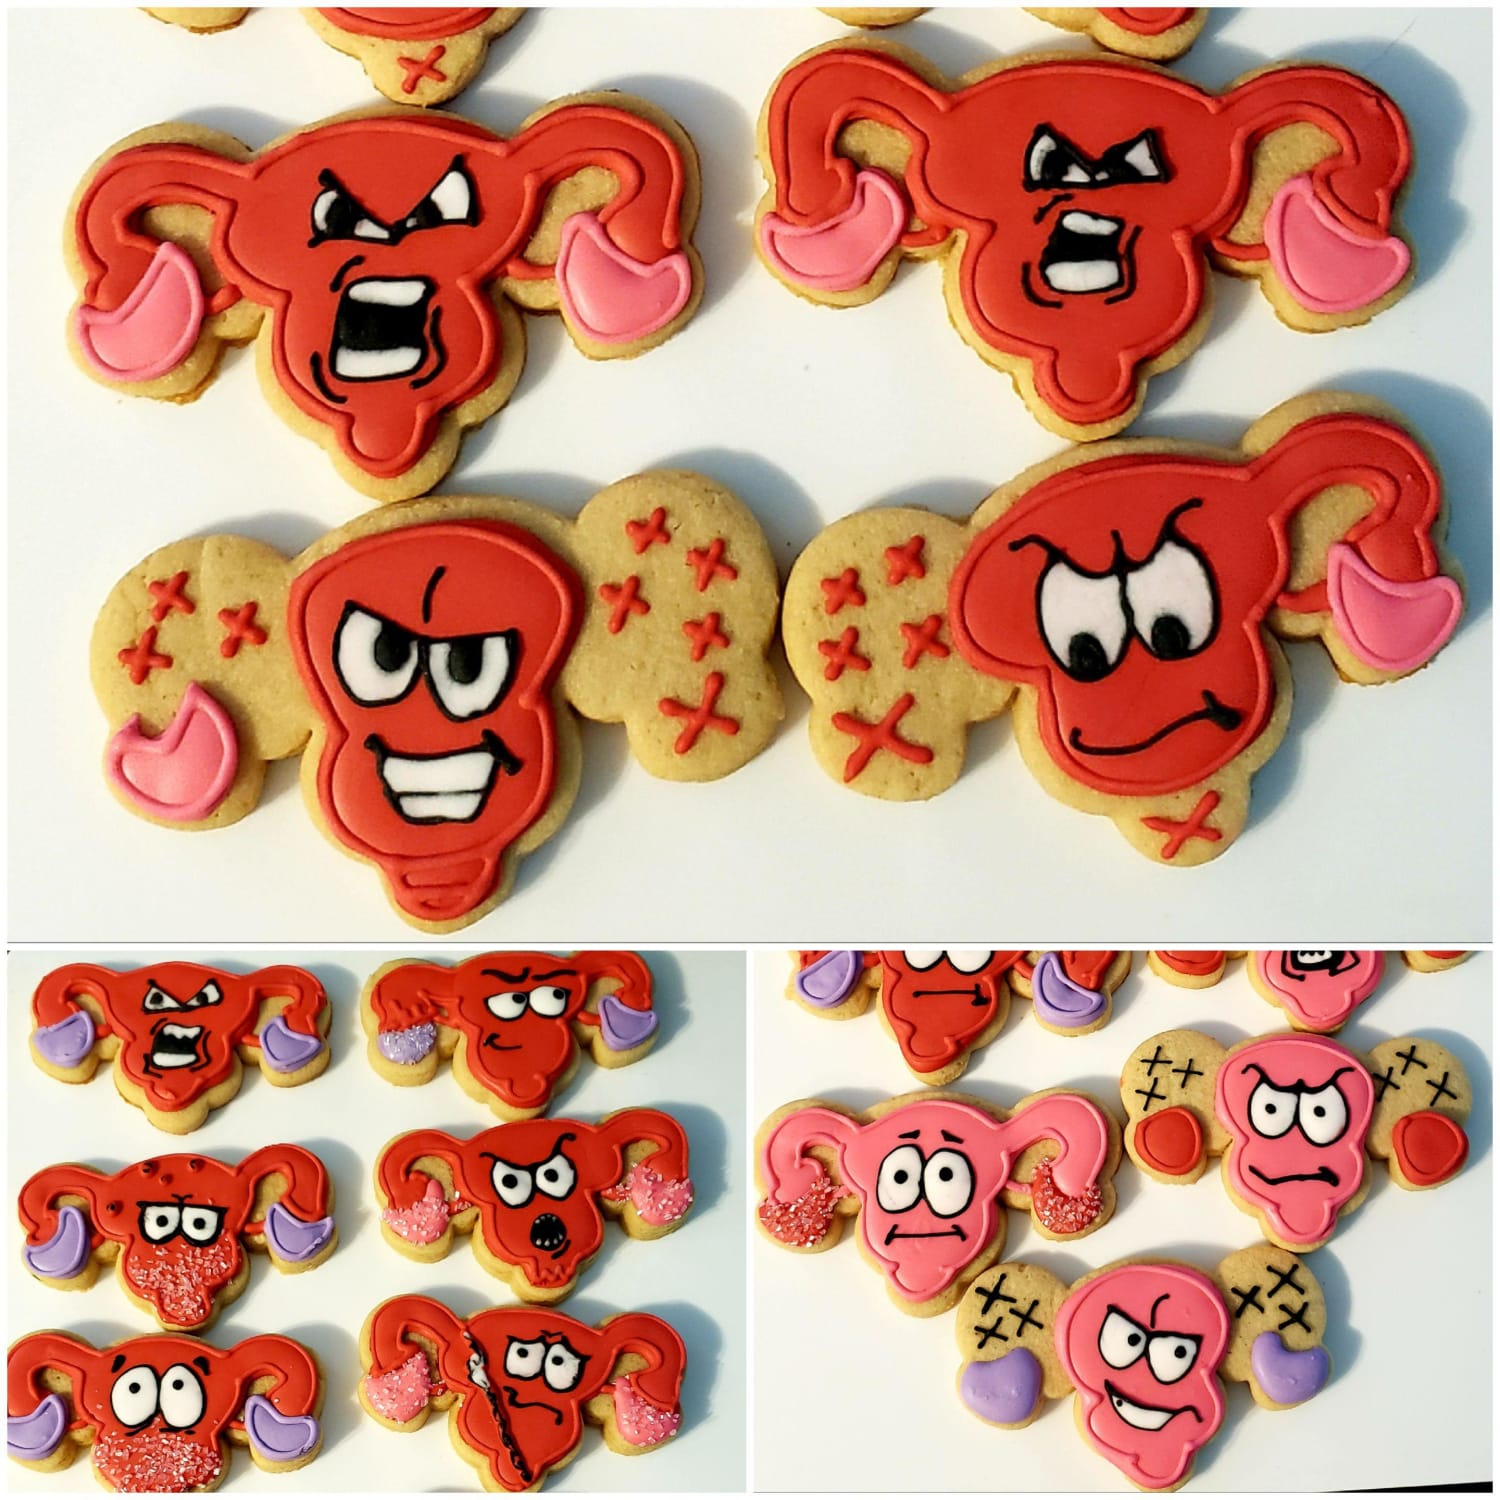 I was told by a little bird to share my angry uterus cookies to this sub! I hope you all like them!